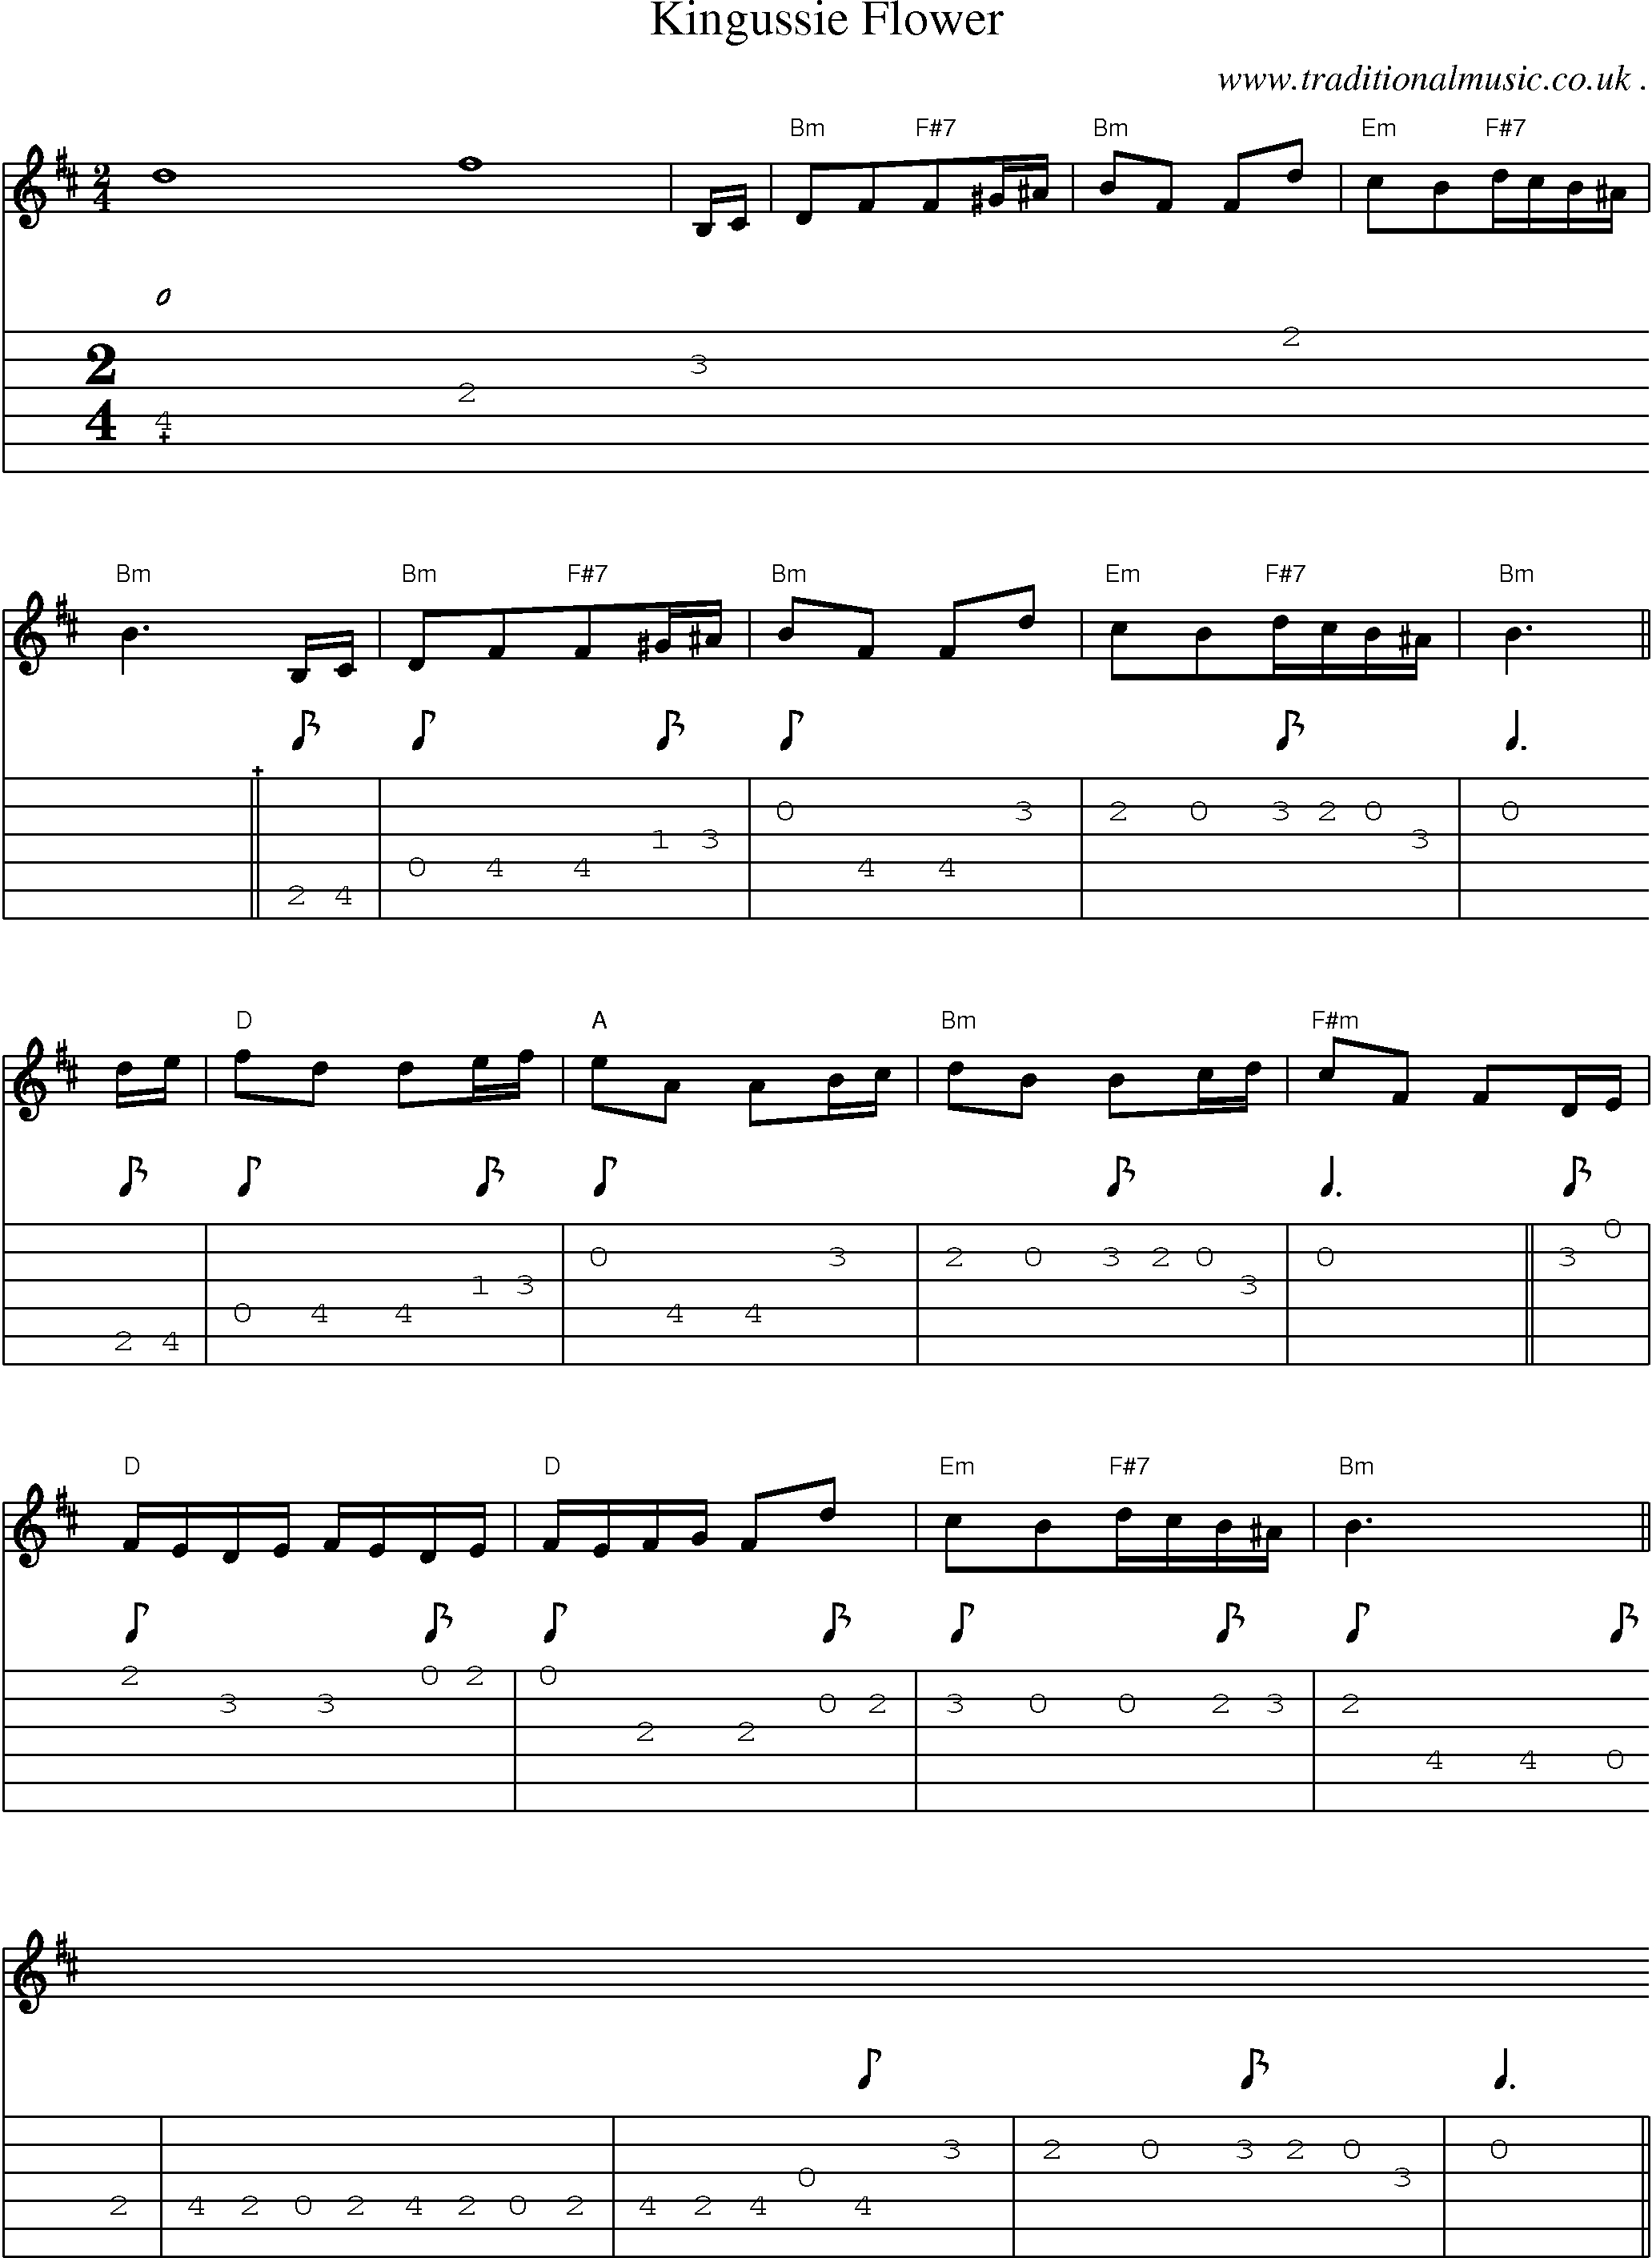 Sheet-Music and Guitar Tabs for Kingussie Flower